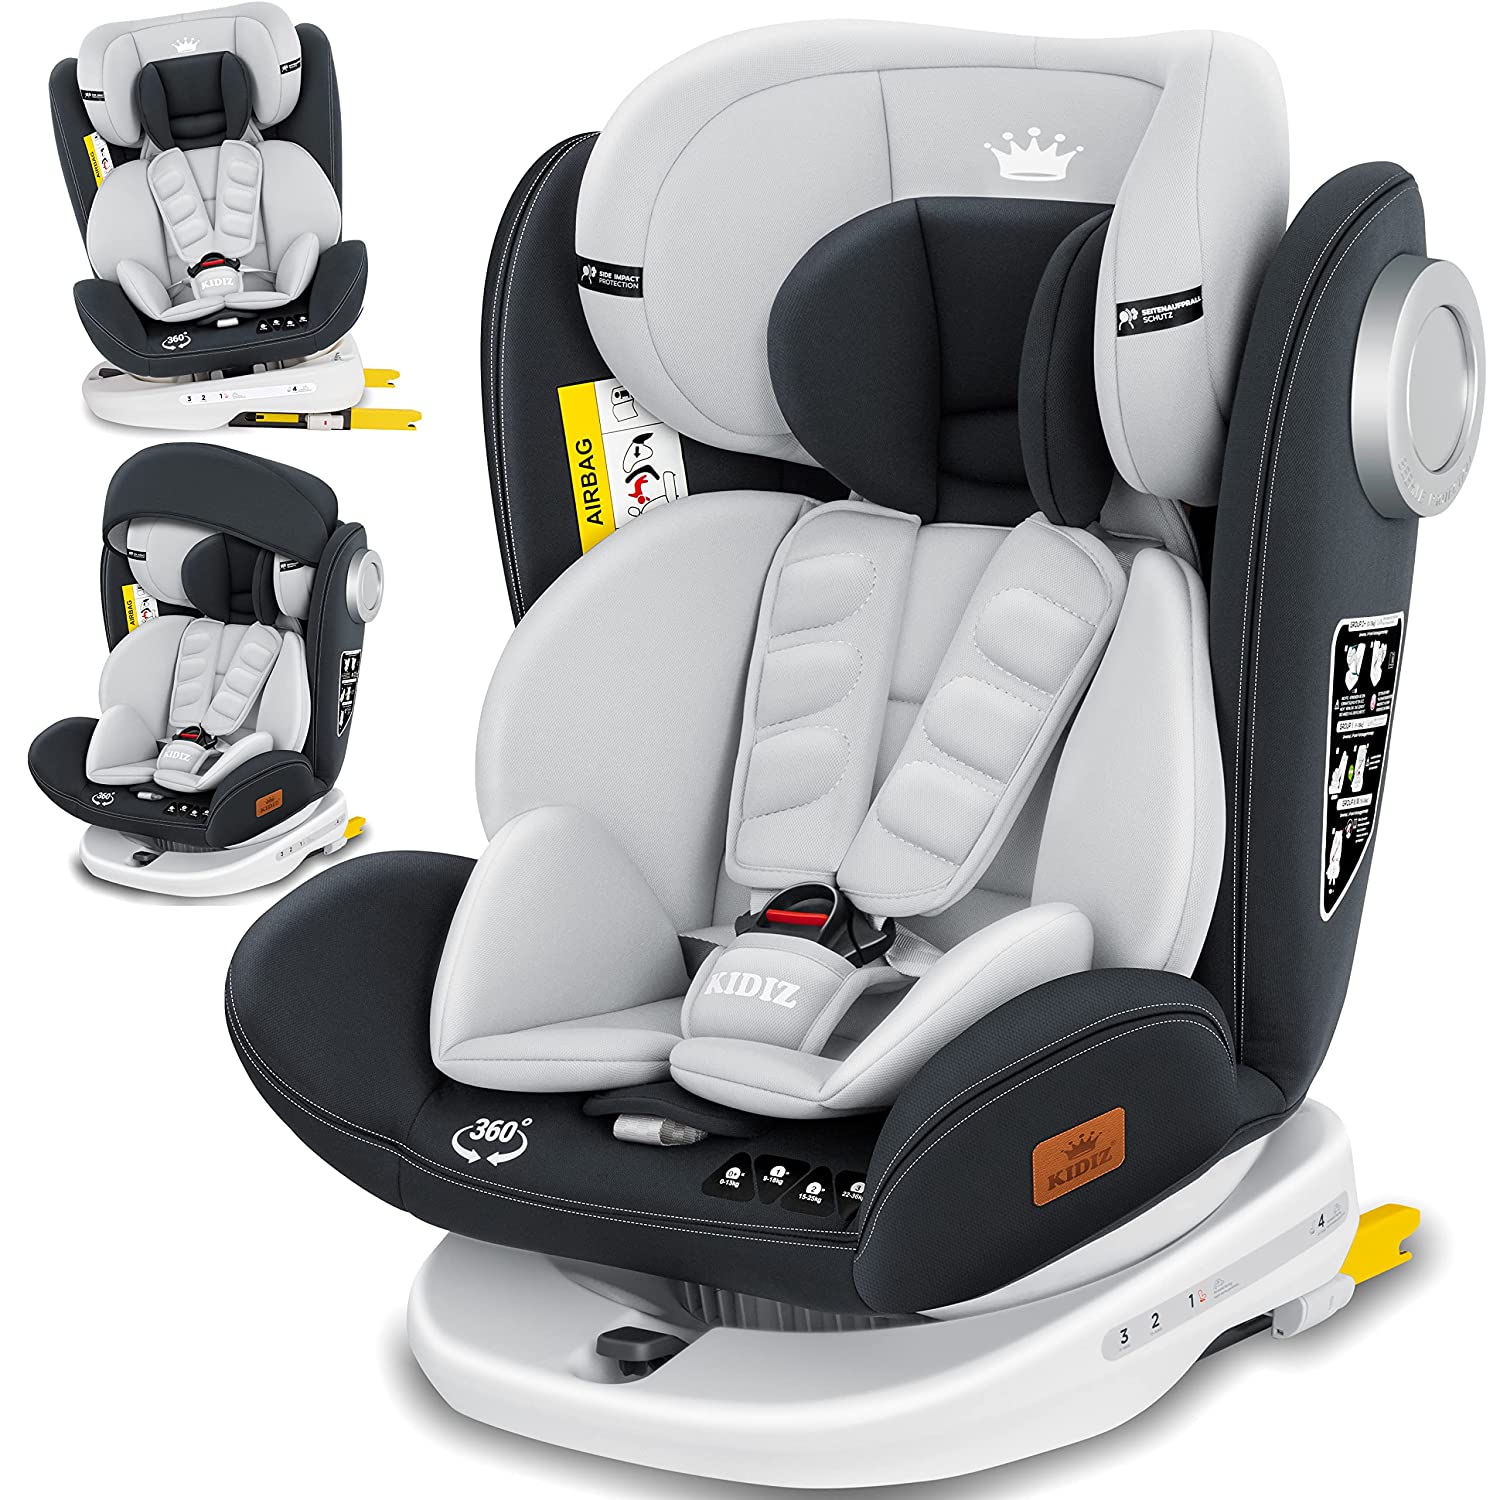 KIDIZ® Isofix Top Tether Child Car Seat 360° Rotatable Group 0/1/2/3 from B